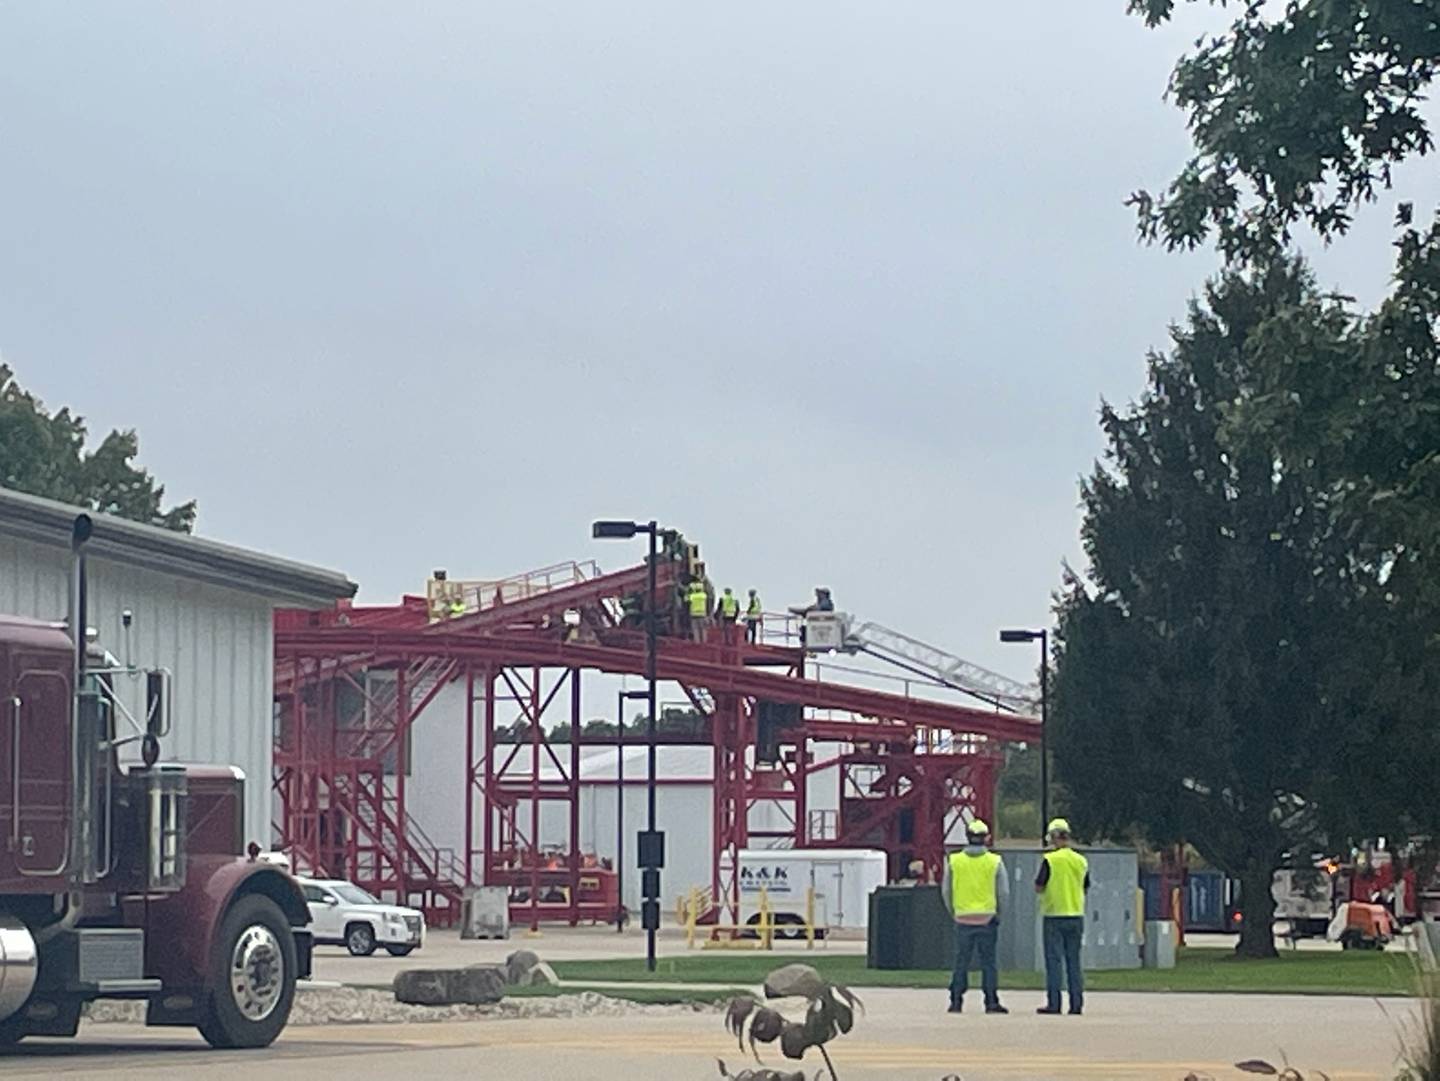 Firefighters freed a woman who was trapped in a conveyer belt about 40 feet above the ground at a Utica agricultural facility.